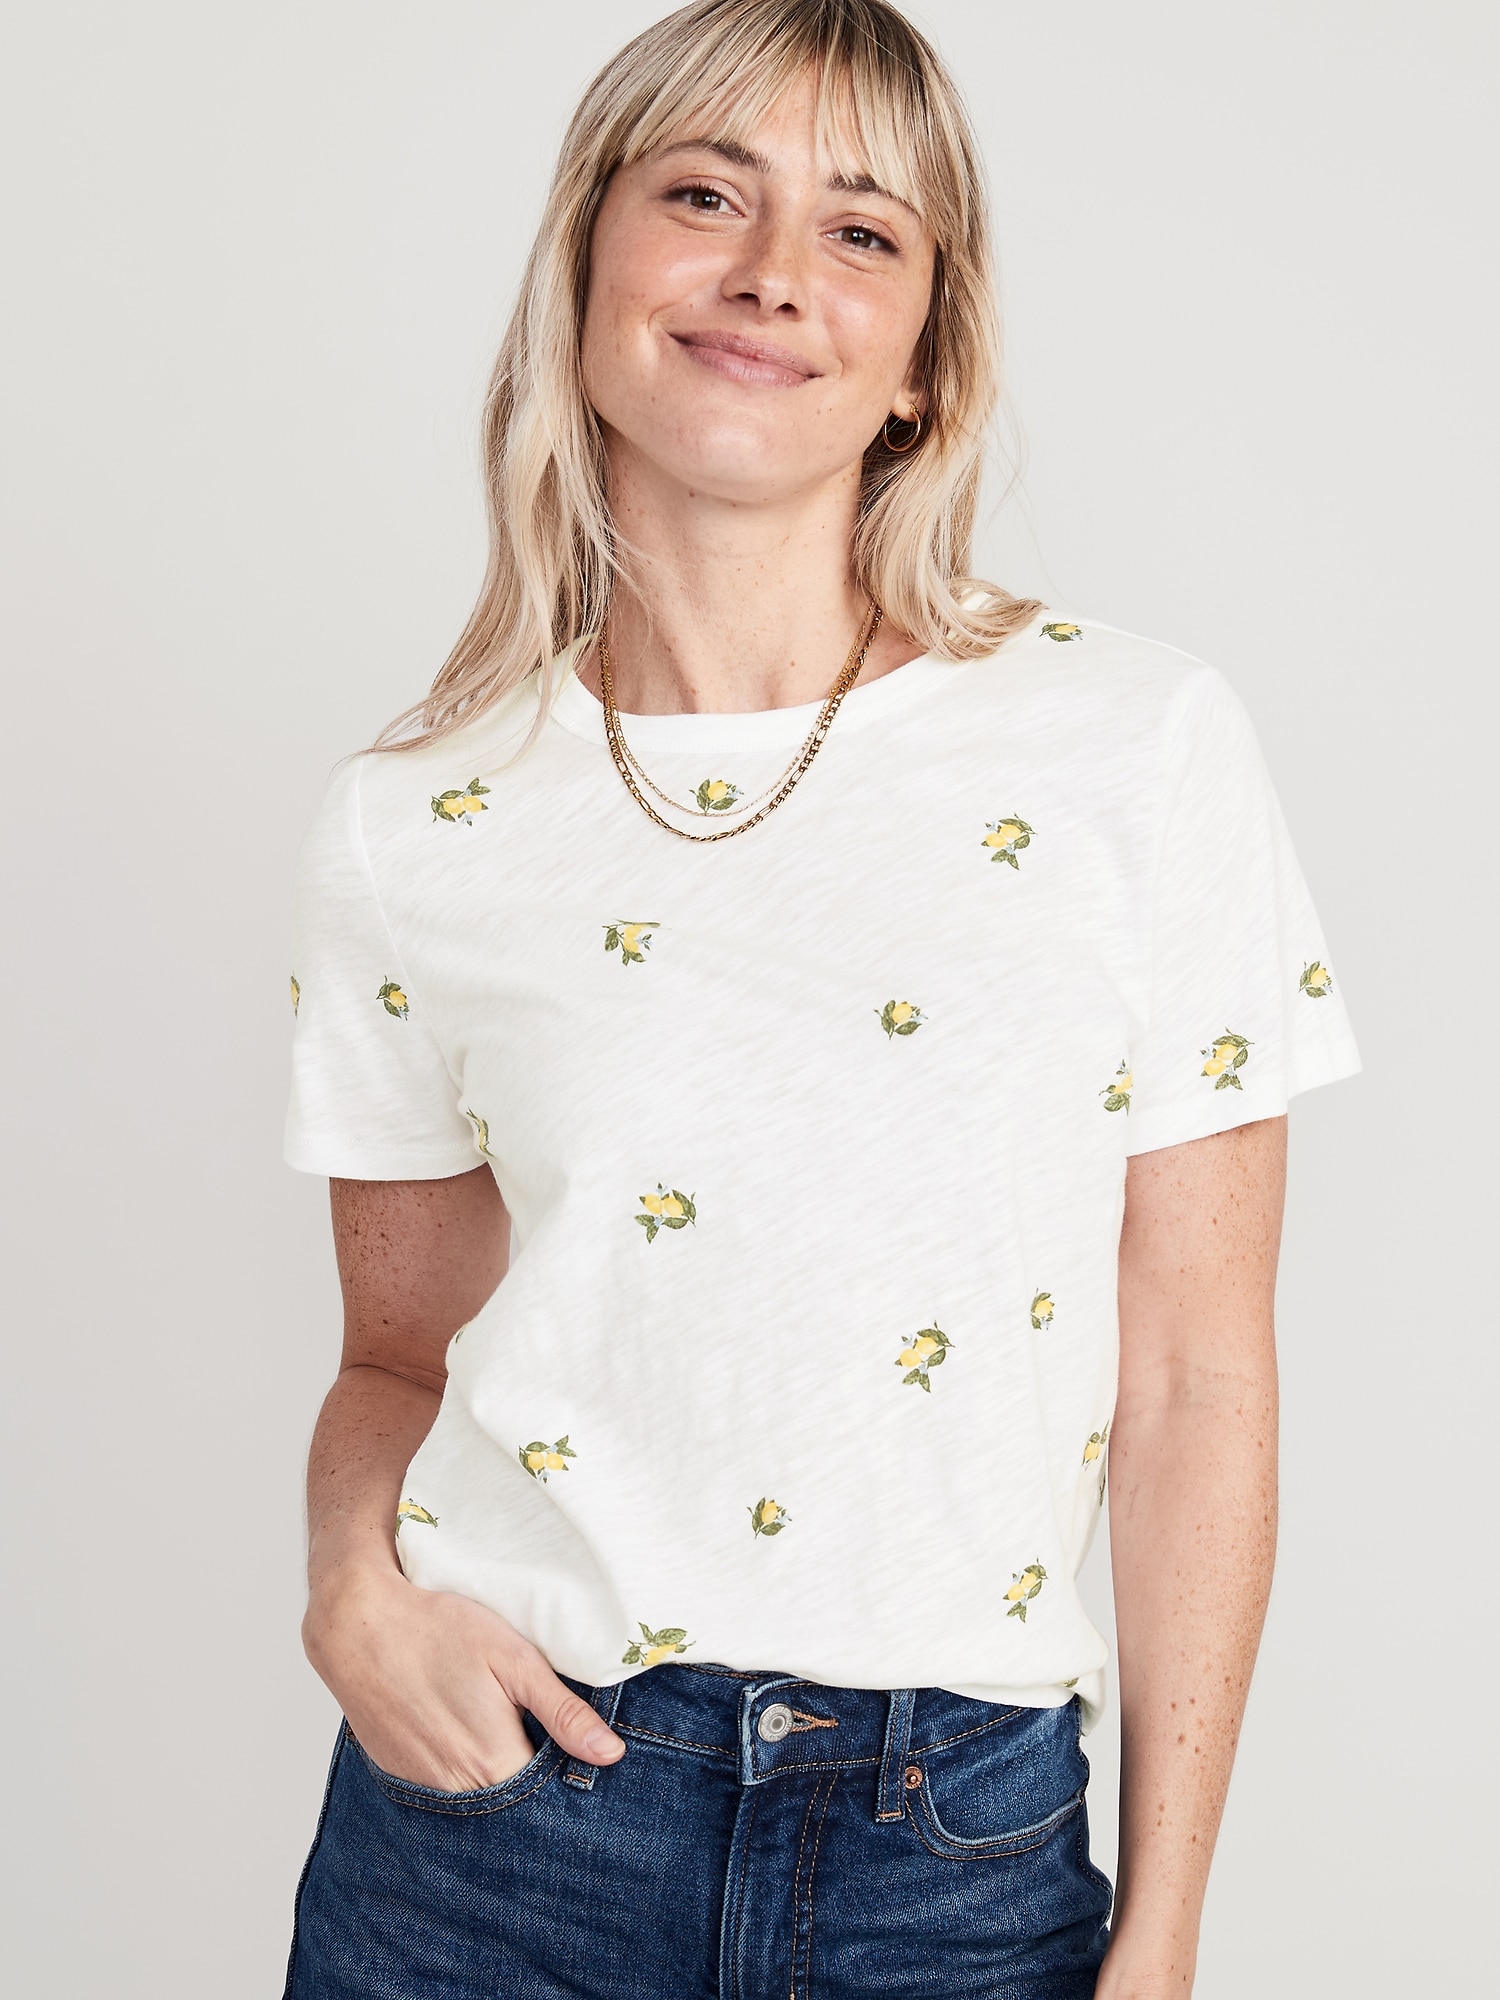 Old Navy EveryWear Crew-Neck Printed T-Shirt for Women yellow. 1